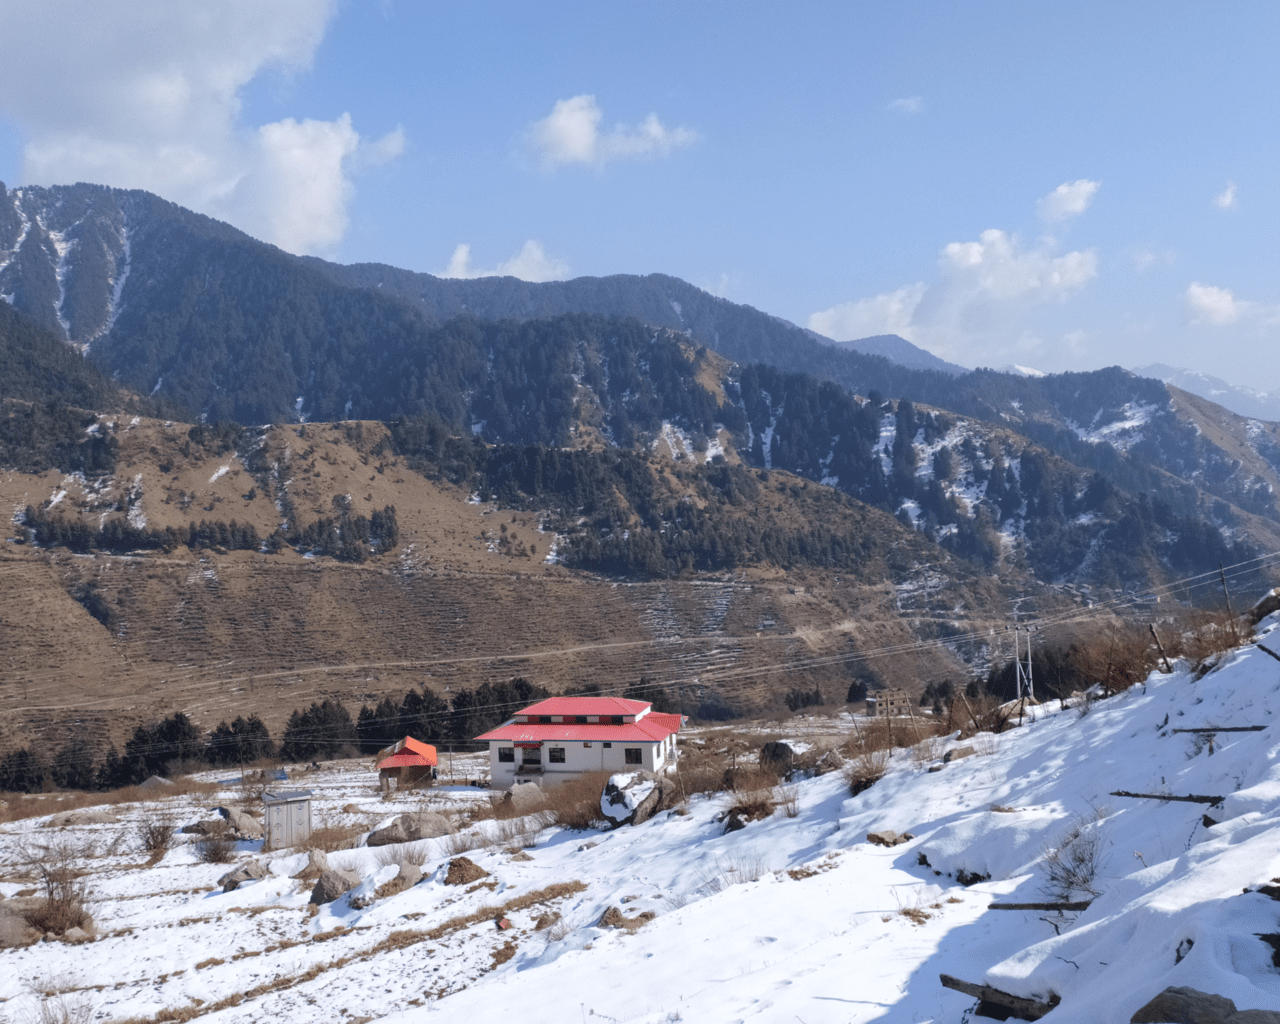 Where to stay in Barot valley